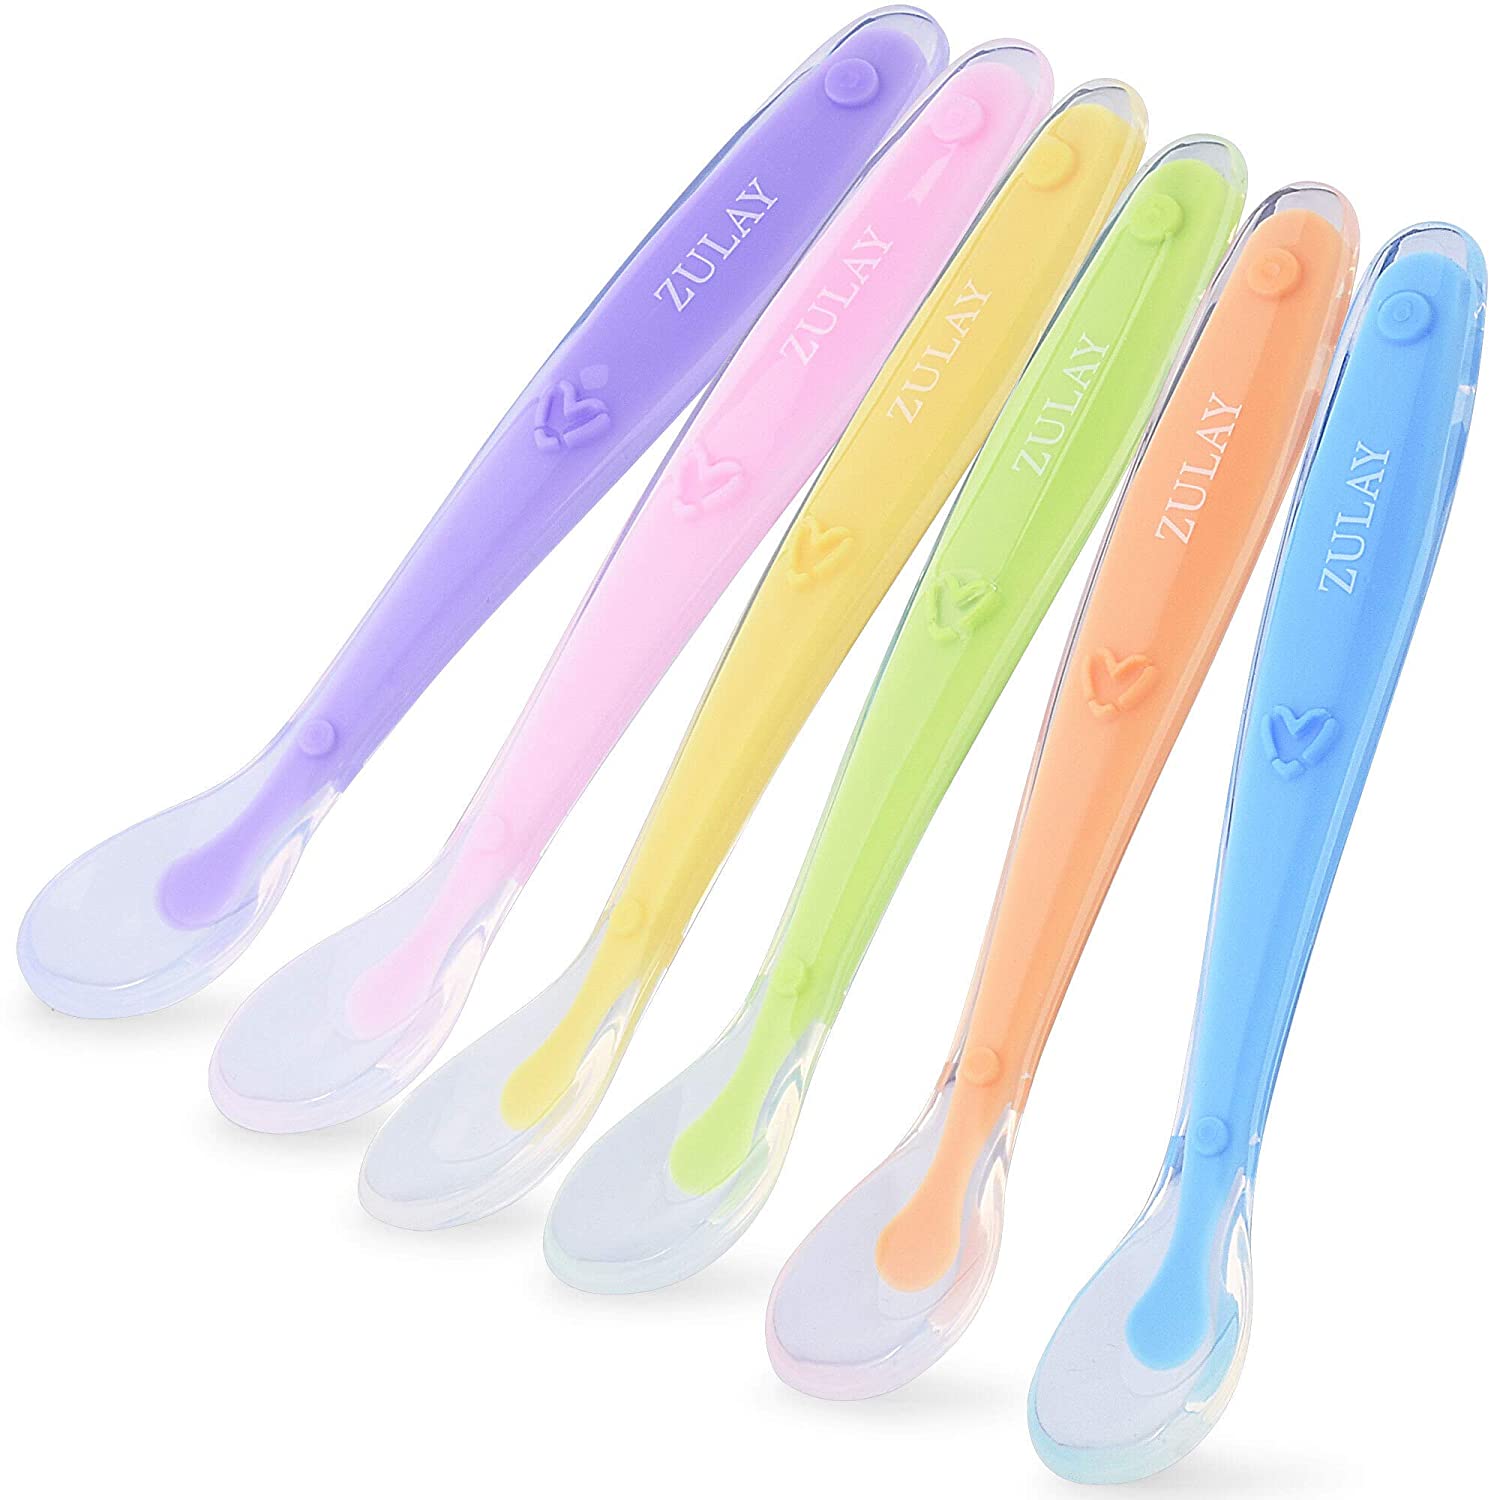 Silicone Baby Spoon (6 Pack) - BPA Free Gum-Friendly First Stage Baby Feeding Spoon - Zulay KitchenZulay Kitchen